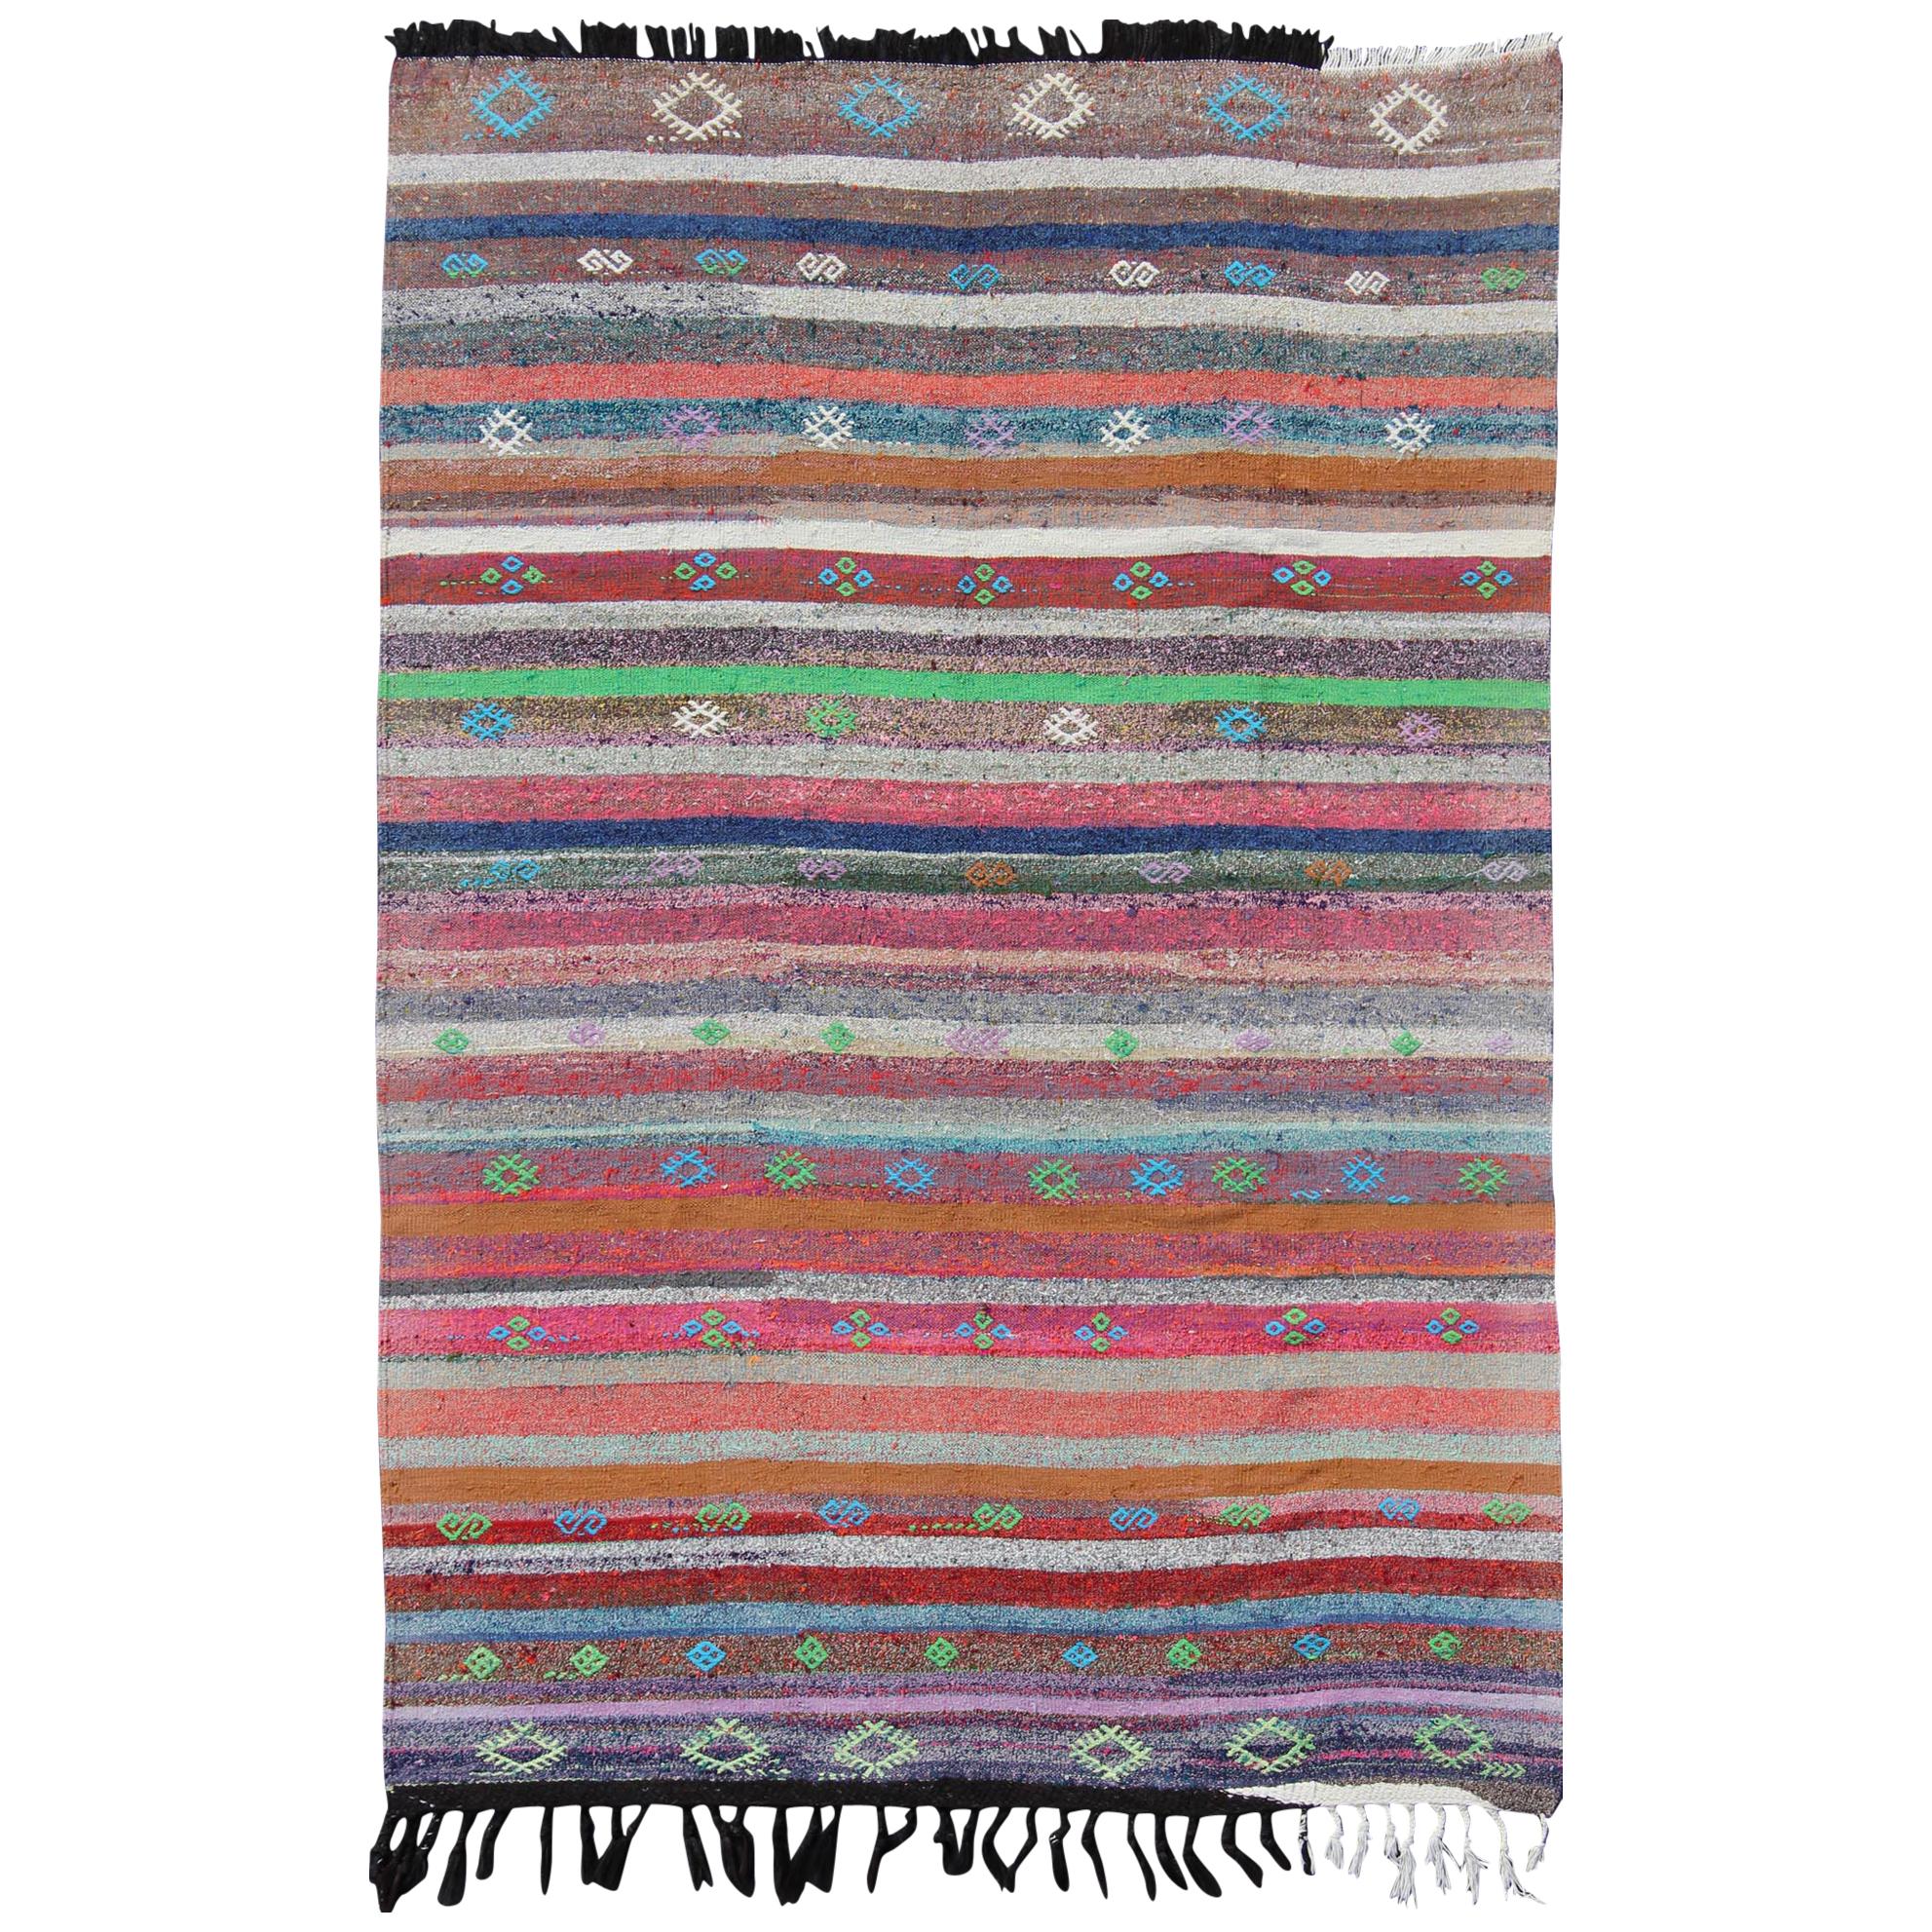 Vintage Turkish Kilim Flat-Weave Rug with Colorful Strips in Bright Colors